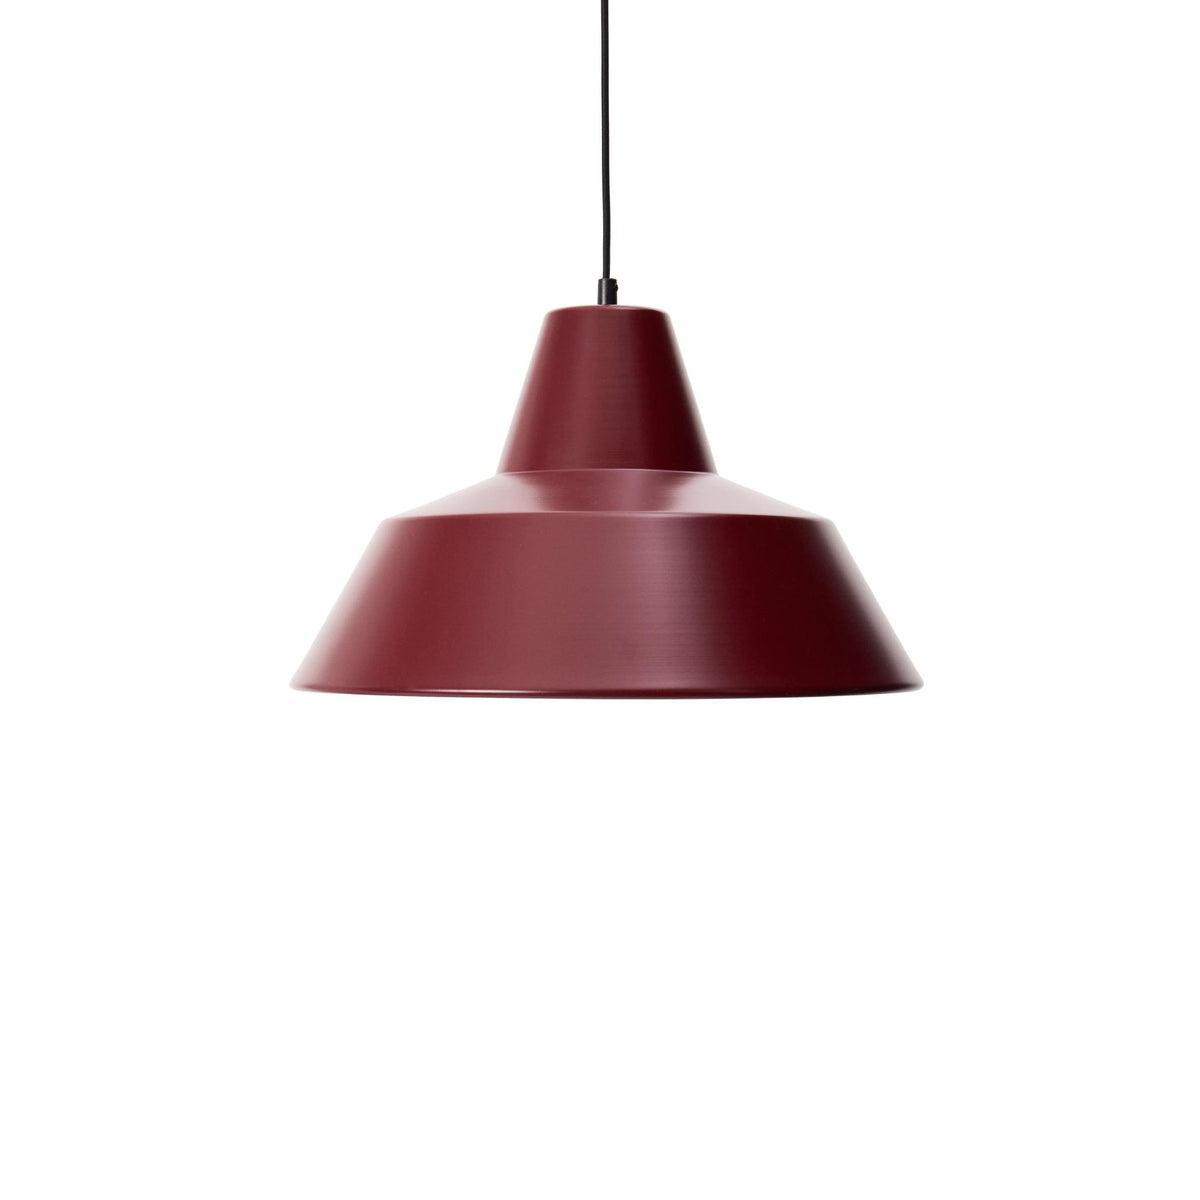 Made by Hand Workshop W4 Pendant in Wine Red by A Wedel Madsen